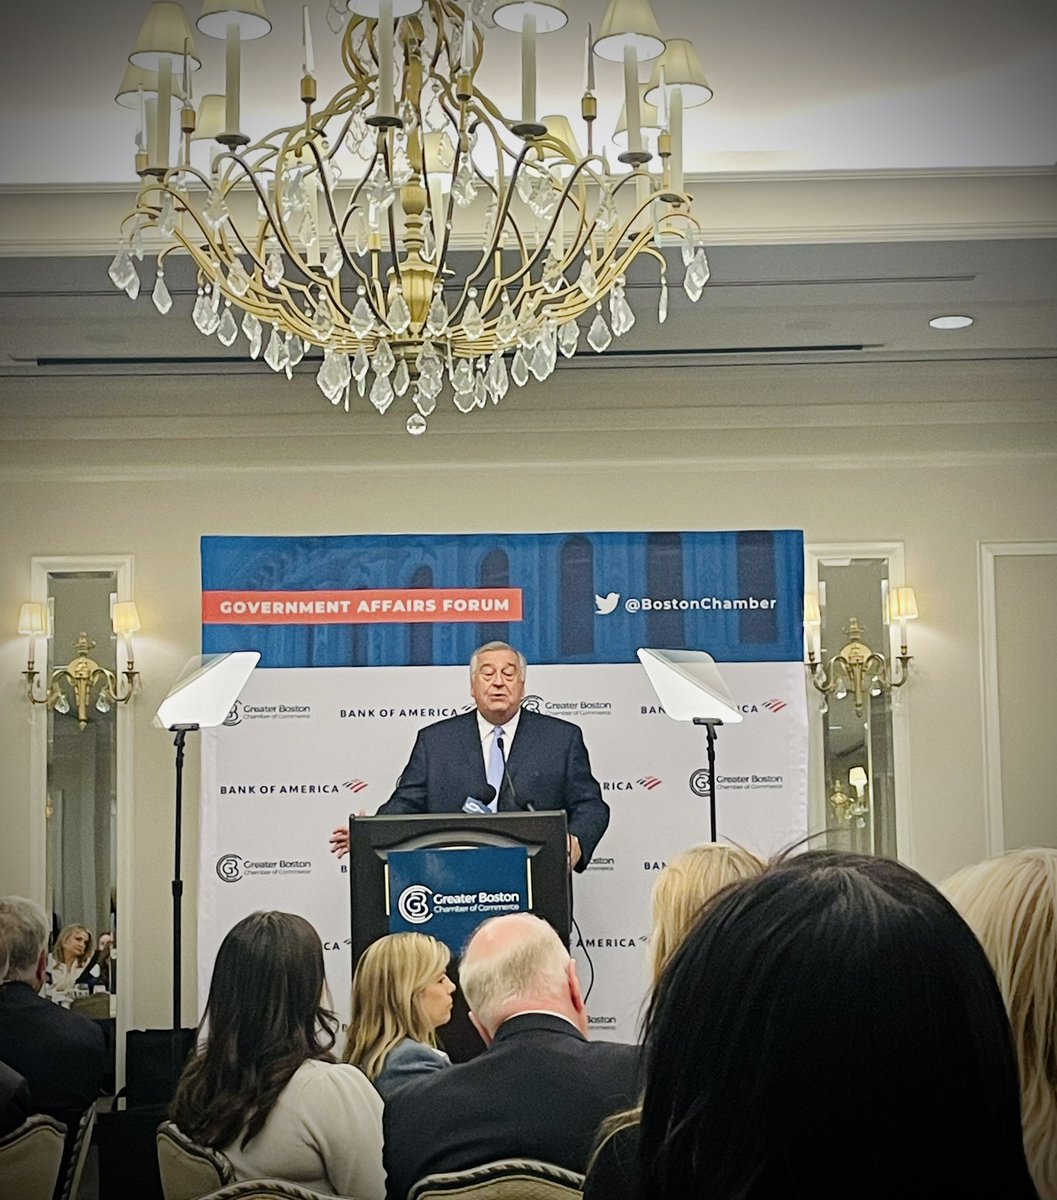 🚨 House Speaker @RonMariano announces at @bostonchamber event that the upcoming House budget proposal will PERMANENTLY fund free school meals for all MA students! 🚨 #feedkidsma #schoolmealsforall @projectbread